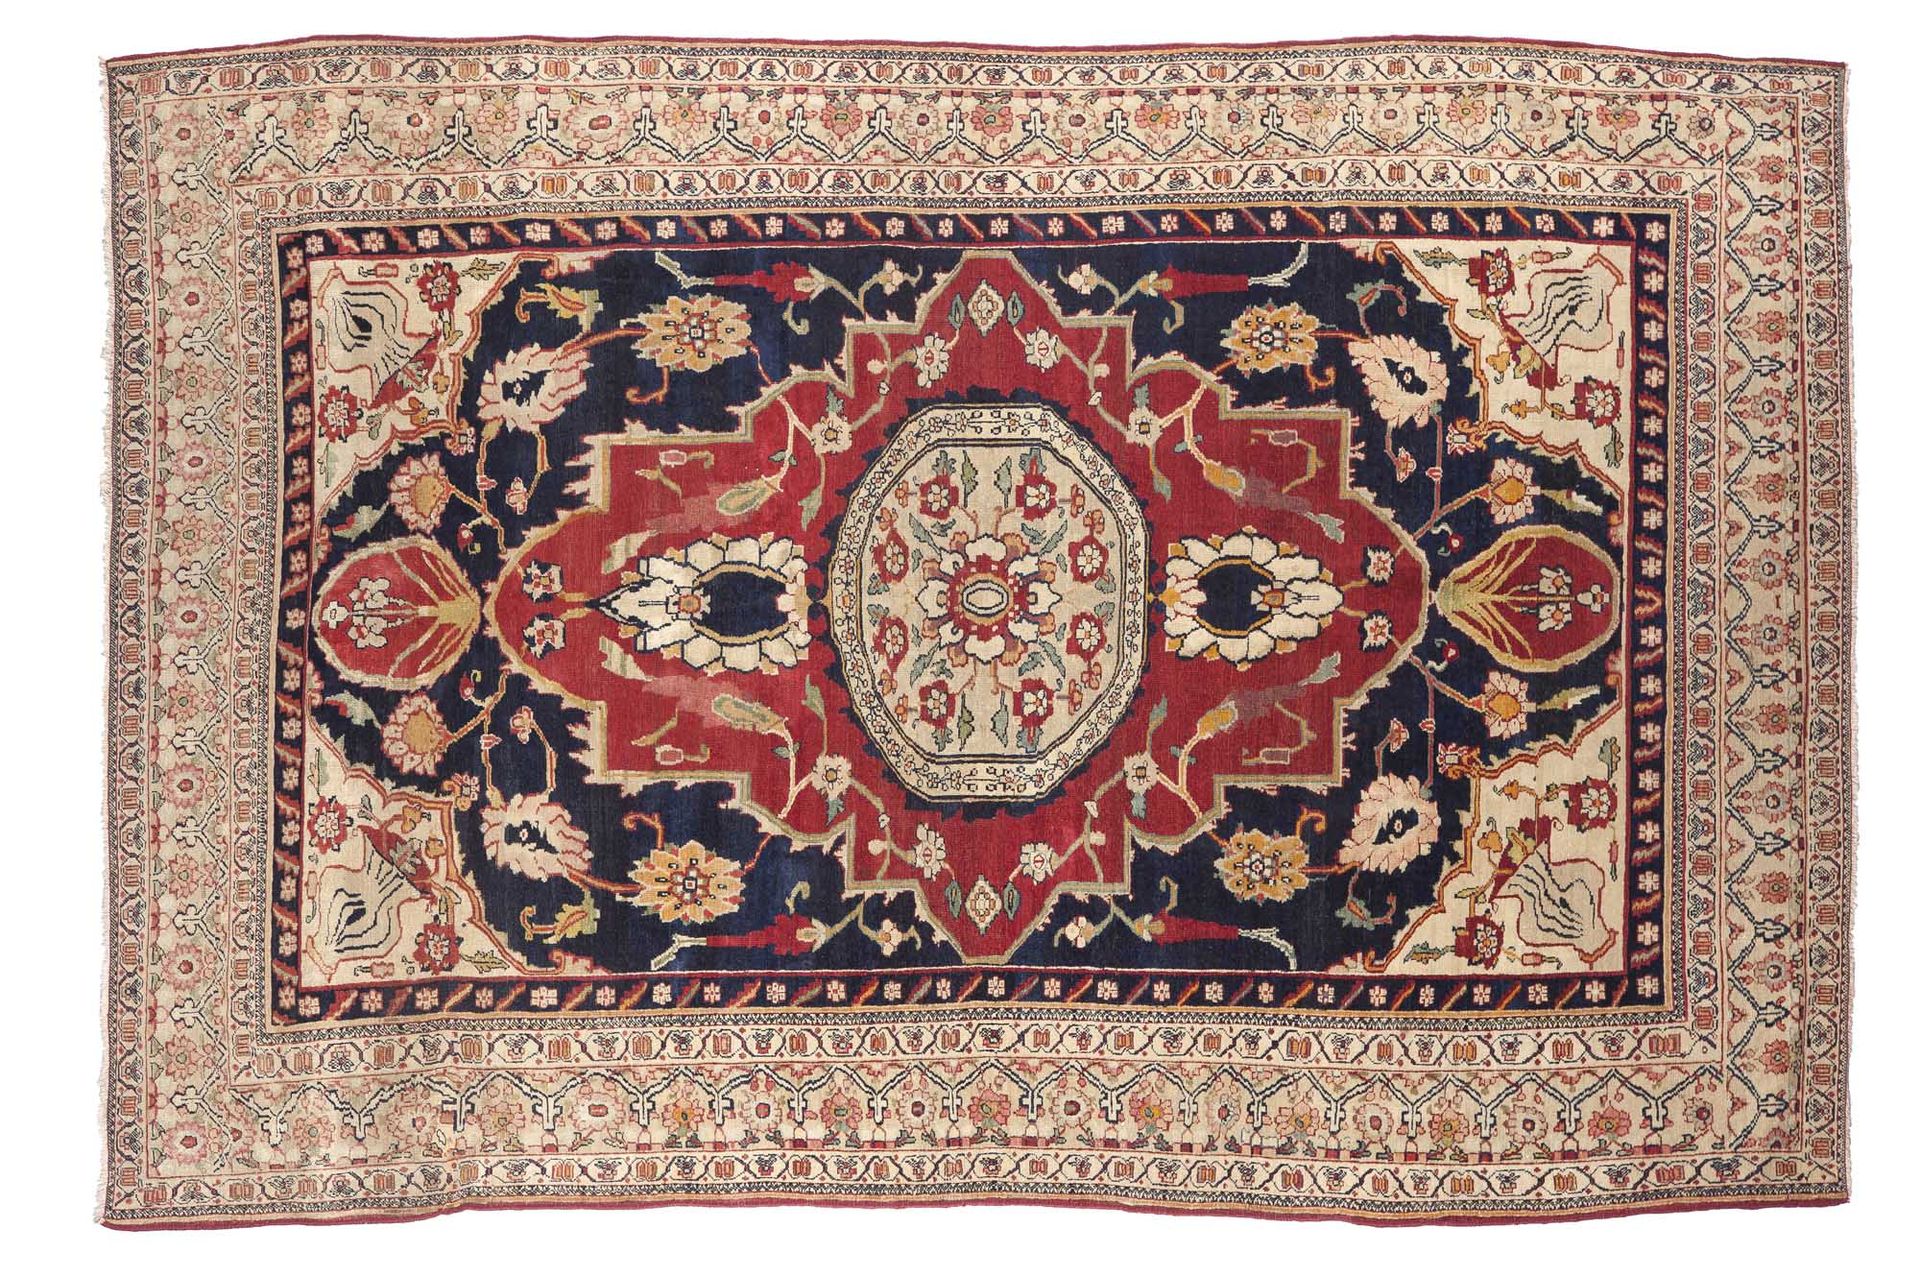 Null KIRMAN-RAVER carpet (Persia), end of the 3rd third of the 19th century

Dim&hellip;